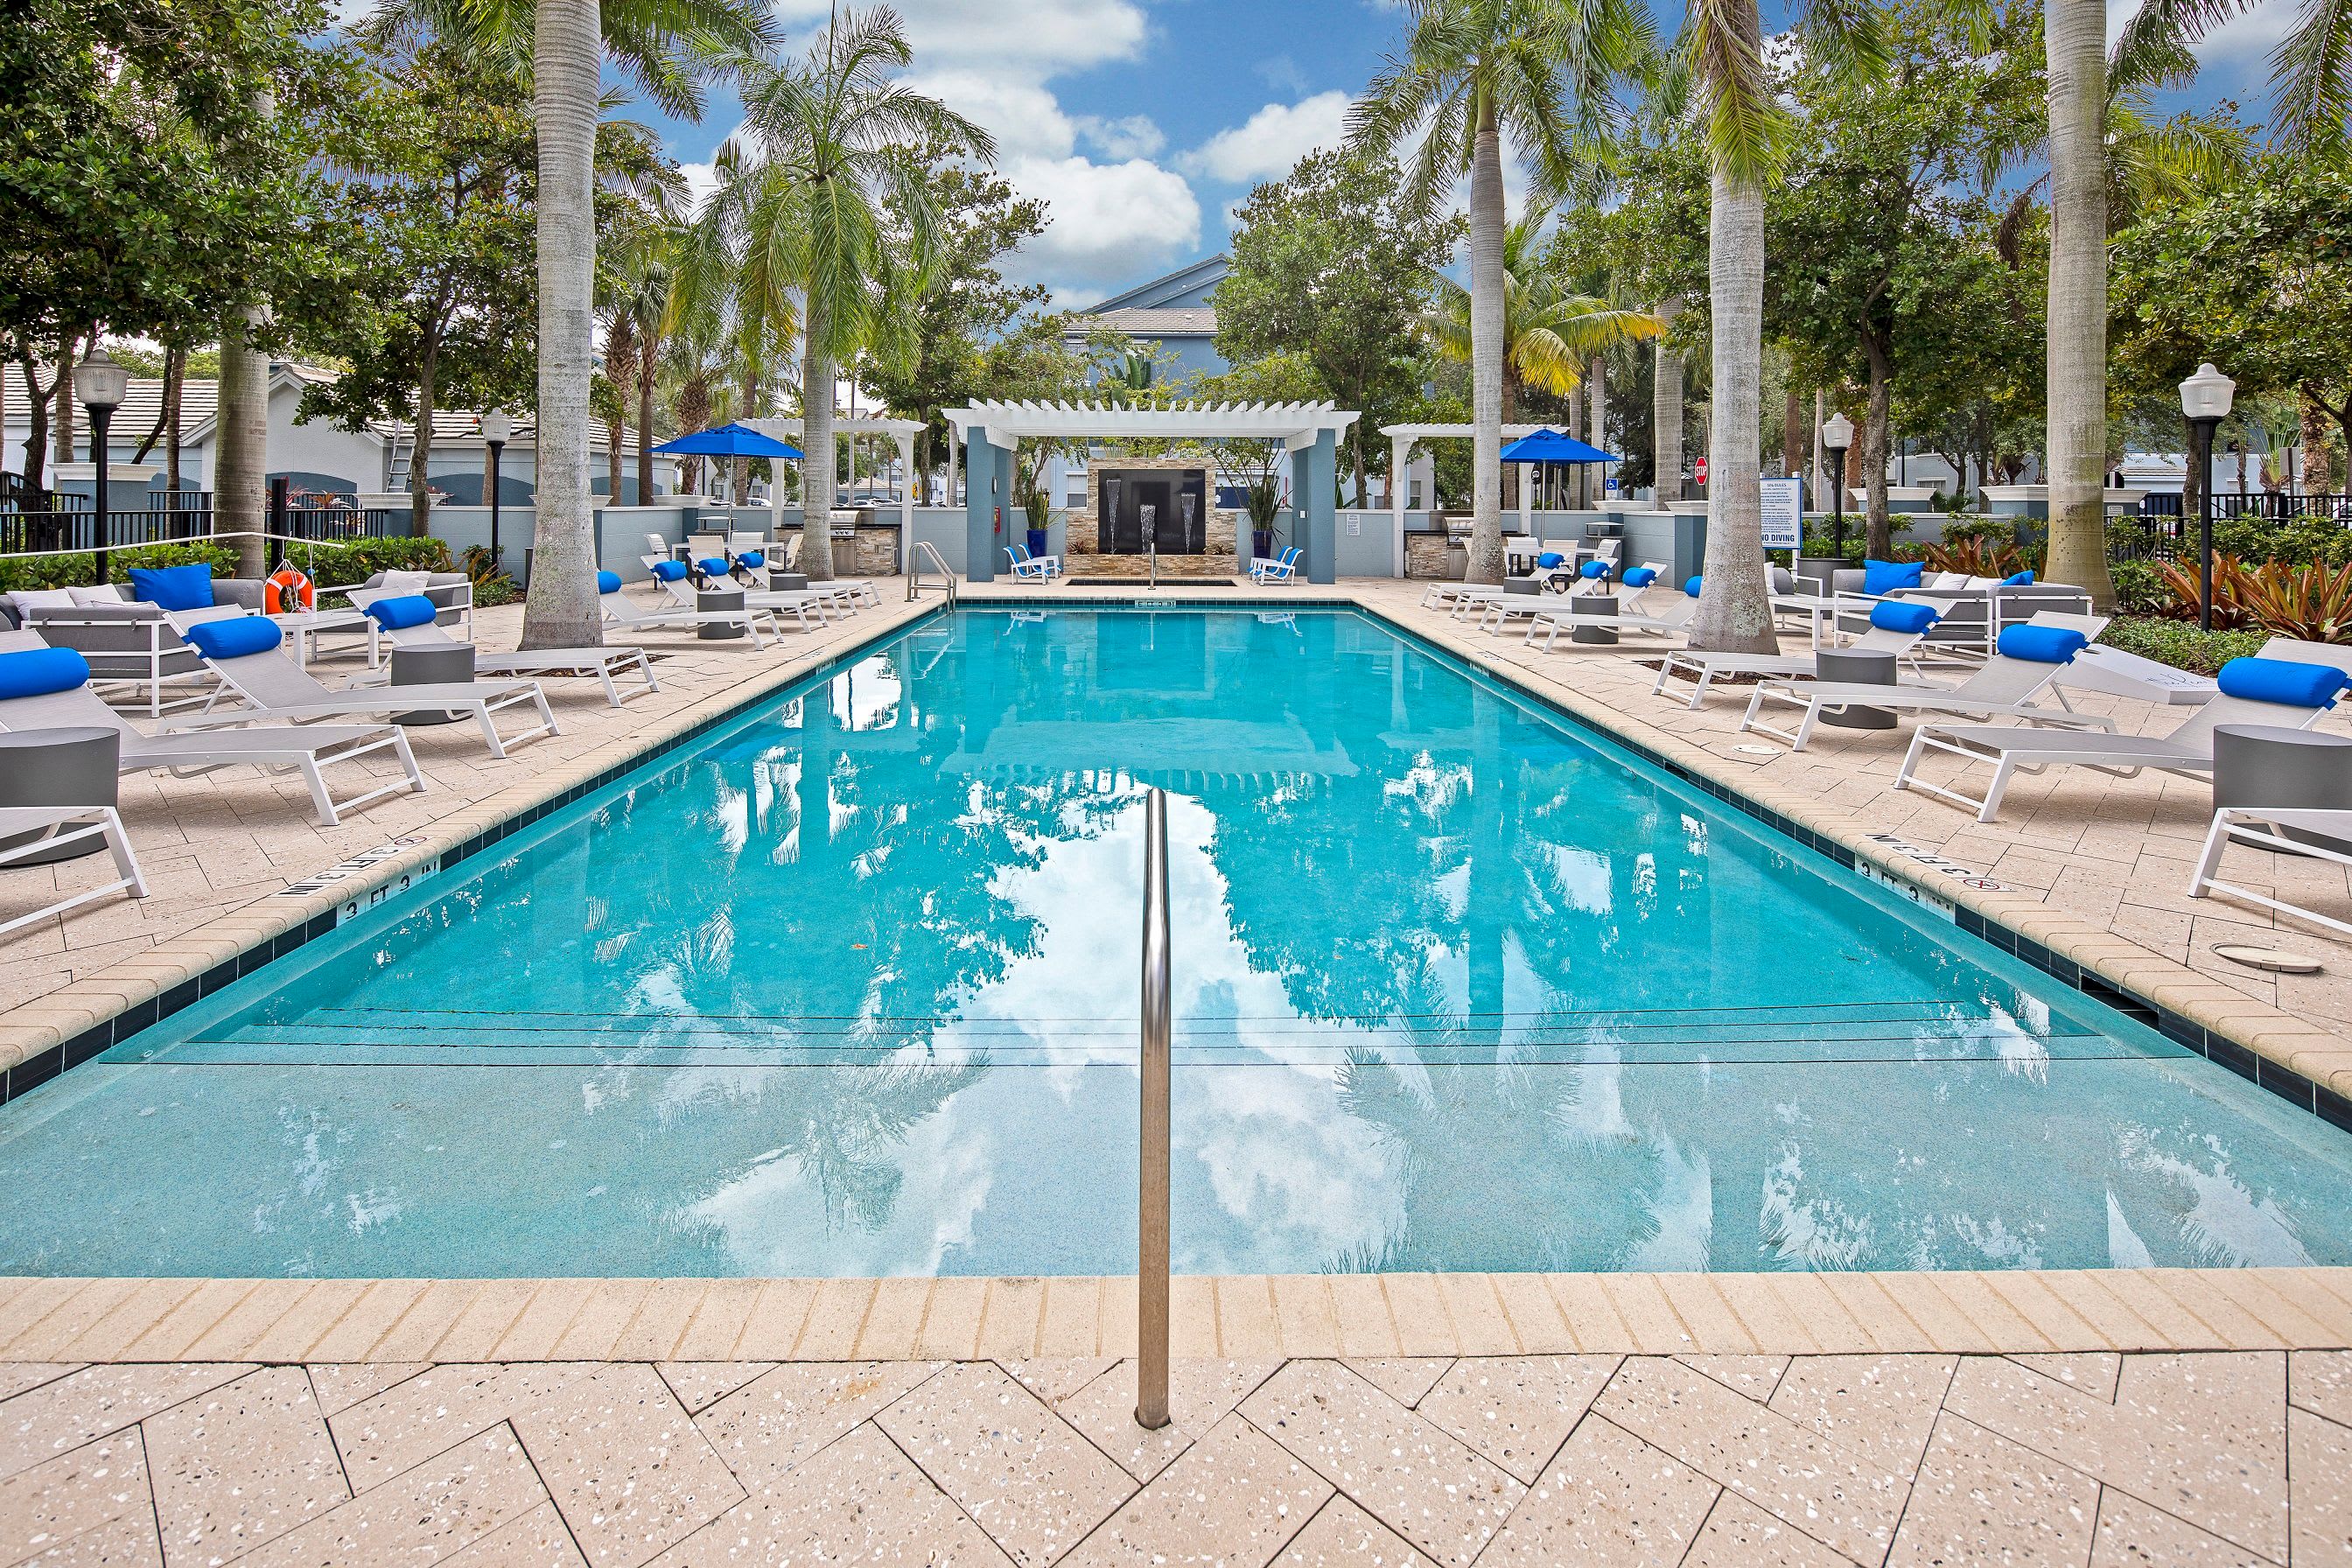 Reviews of The Pearl in Ft Lauderdale, Florida